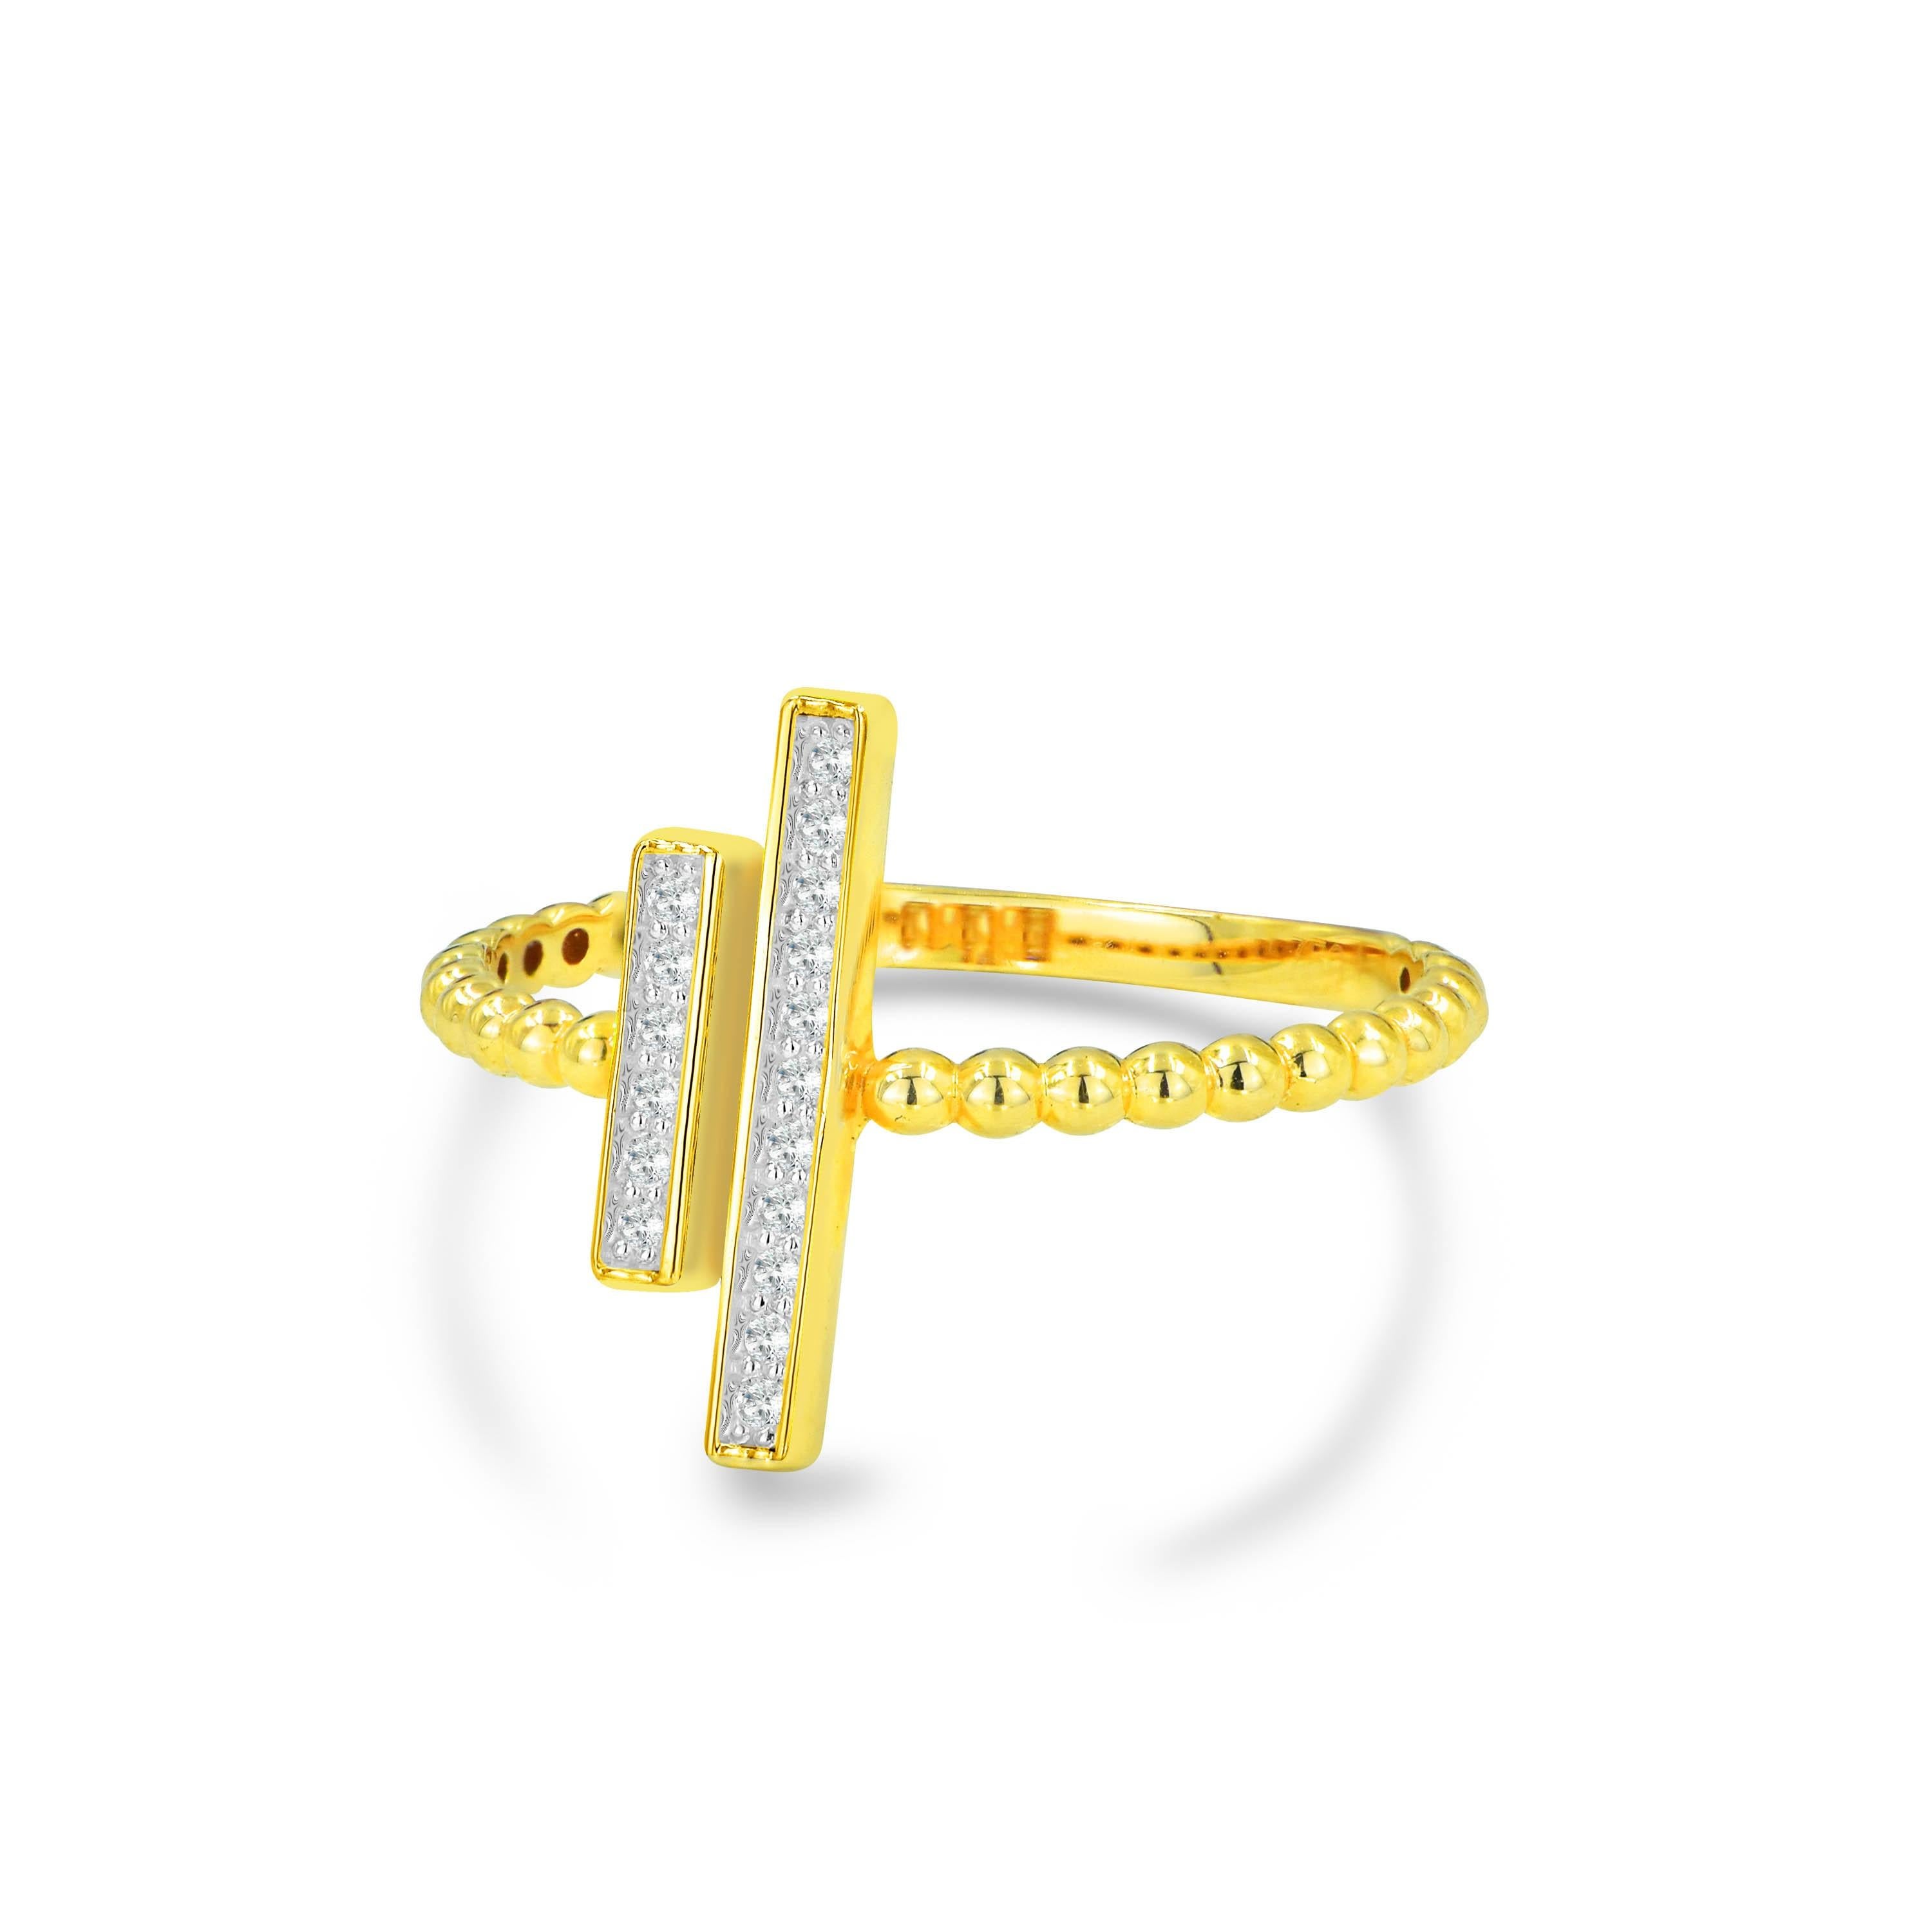 For Sale:  18k Gold Pave Diamond Two Bar Ring Parallel Bar Ring Diamond Bar Ring 5